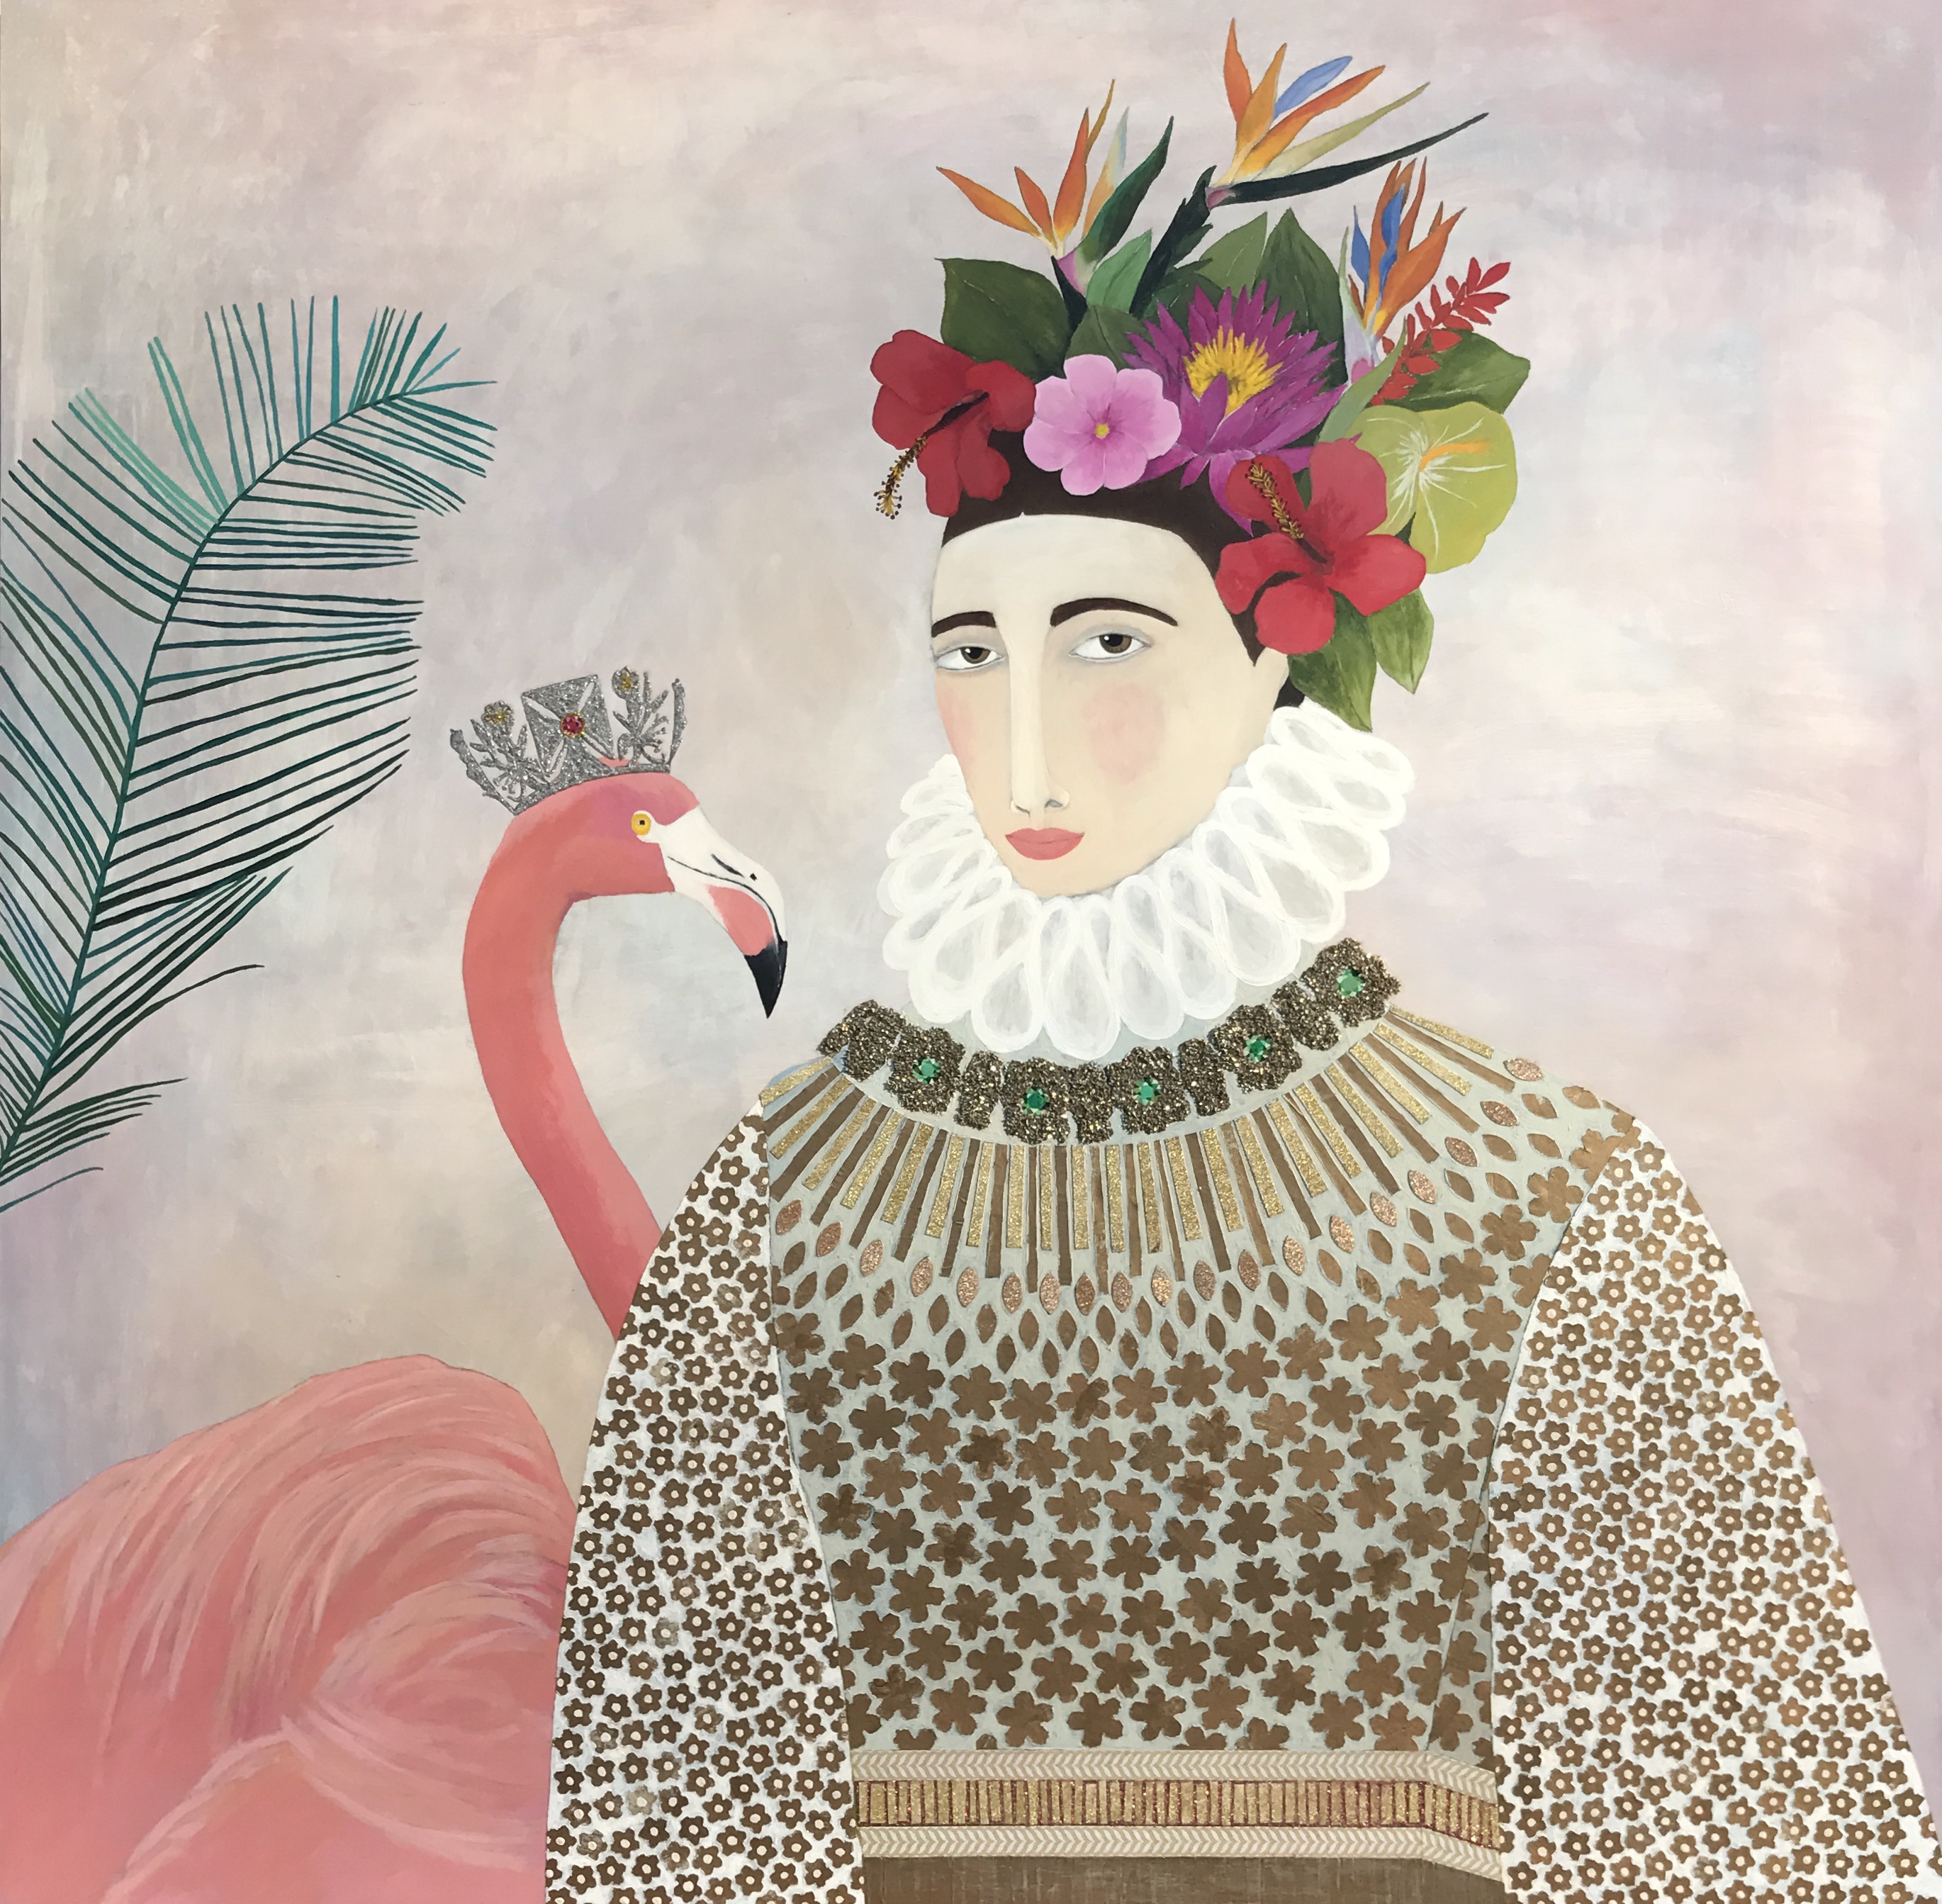 a Spanish princess dressed in finery with a flamingo